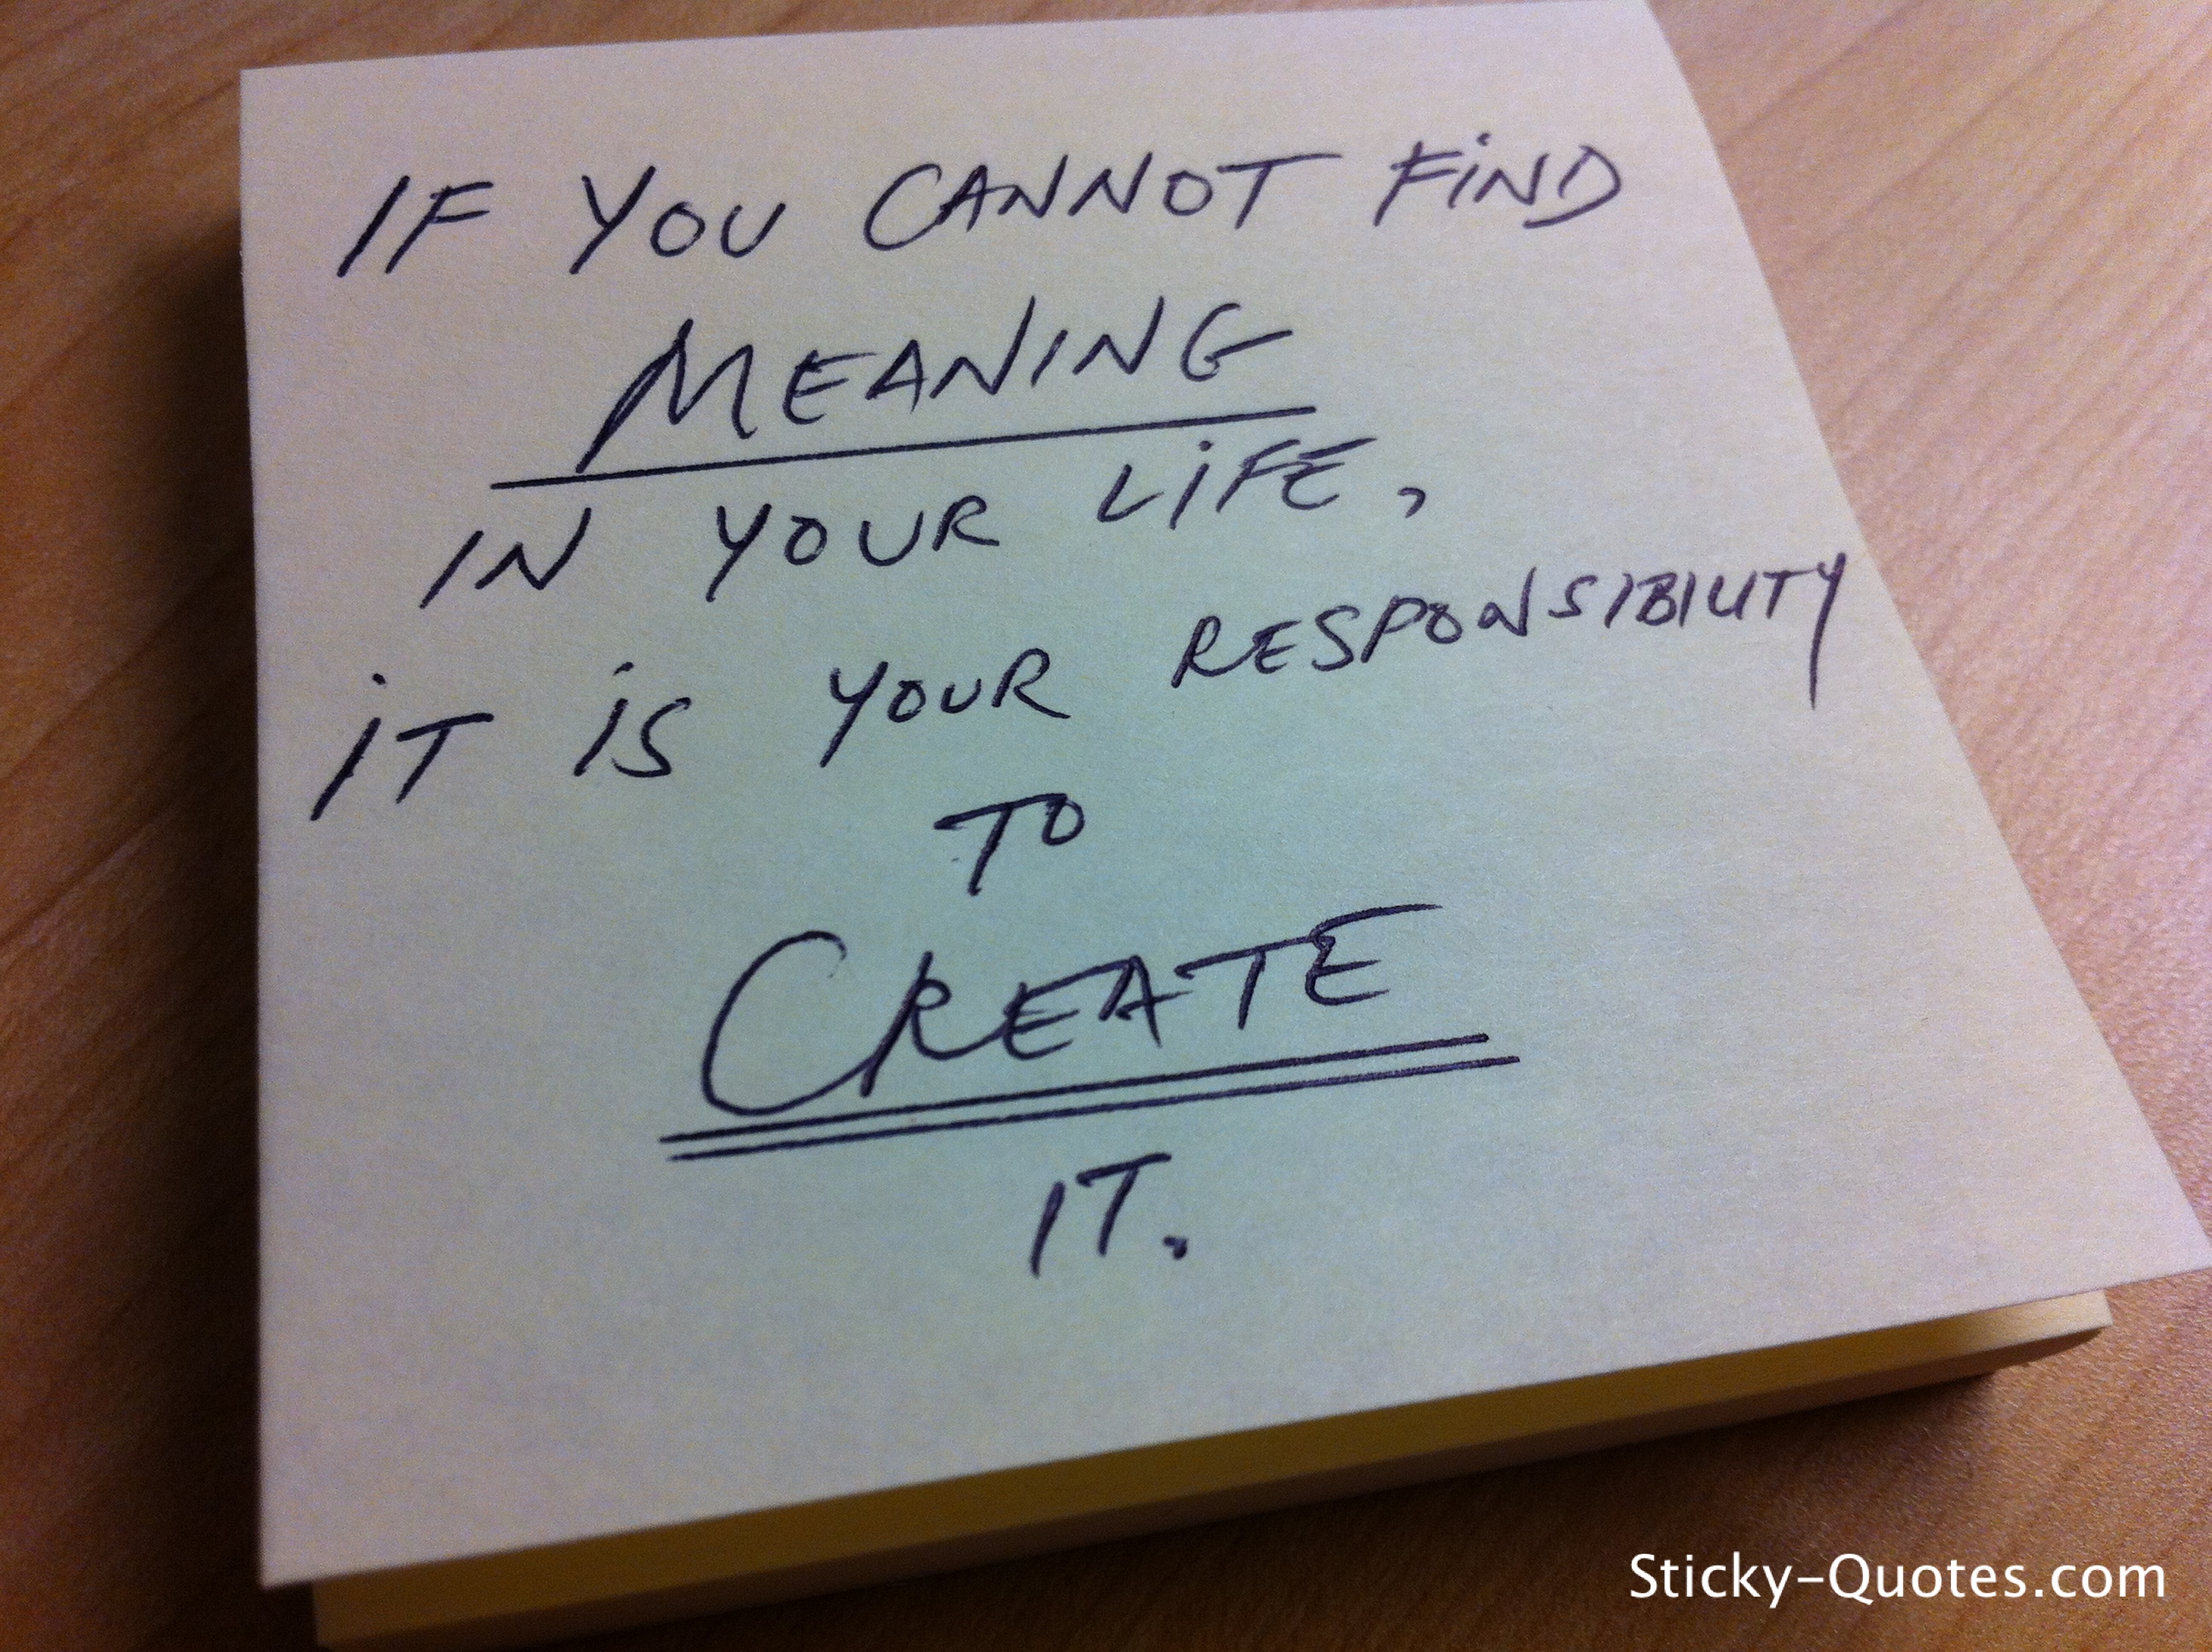 sticky quotes if you cannot find meaning in your life it is your responsibility to create it